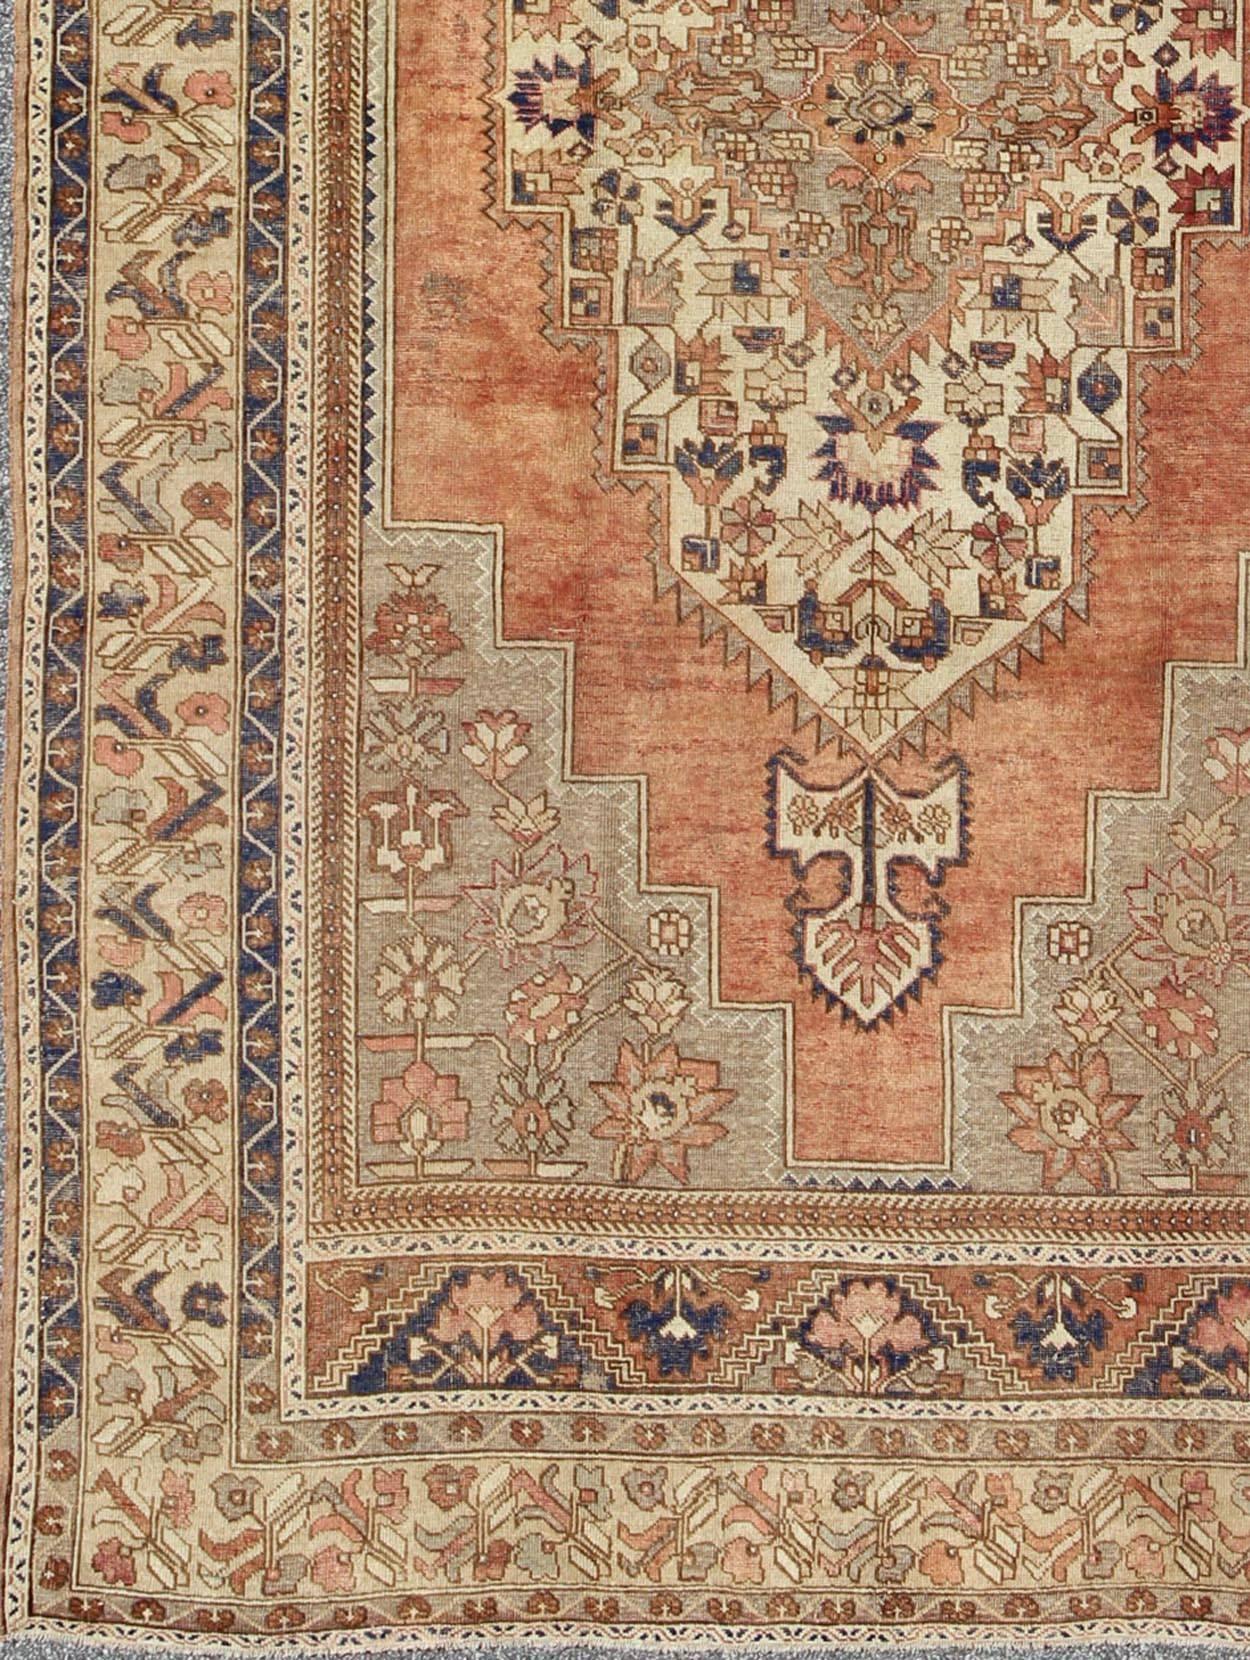 This beautiful Turkish Oushak Rug has a medium blue color with a light orange background. The center medallion has earth tones with blues. The border has a rolling flower pattern. There are colors such as creamy yellow, light green, grey blue,